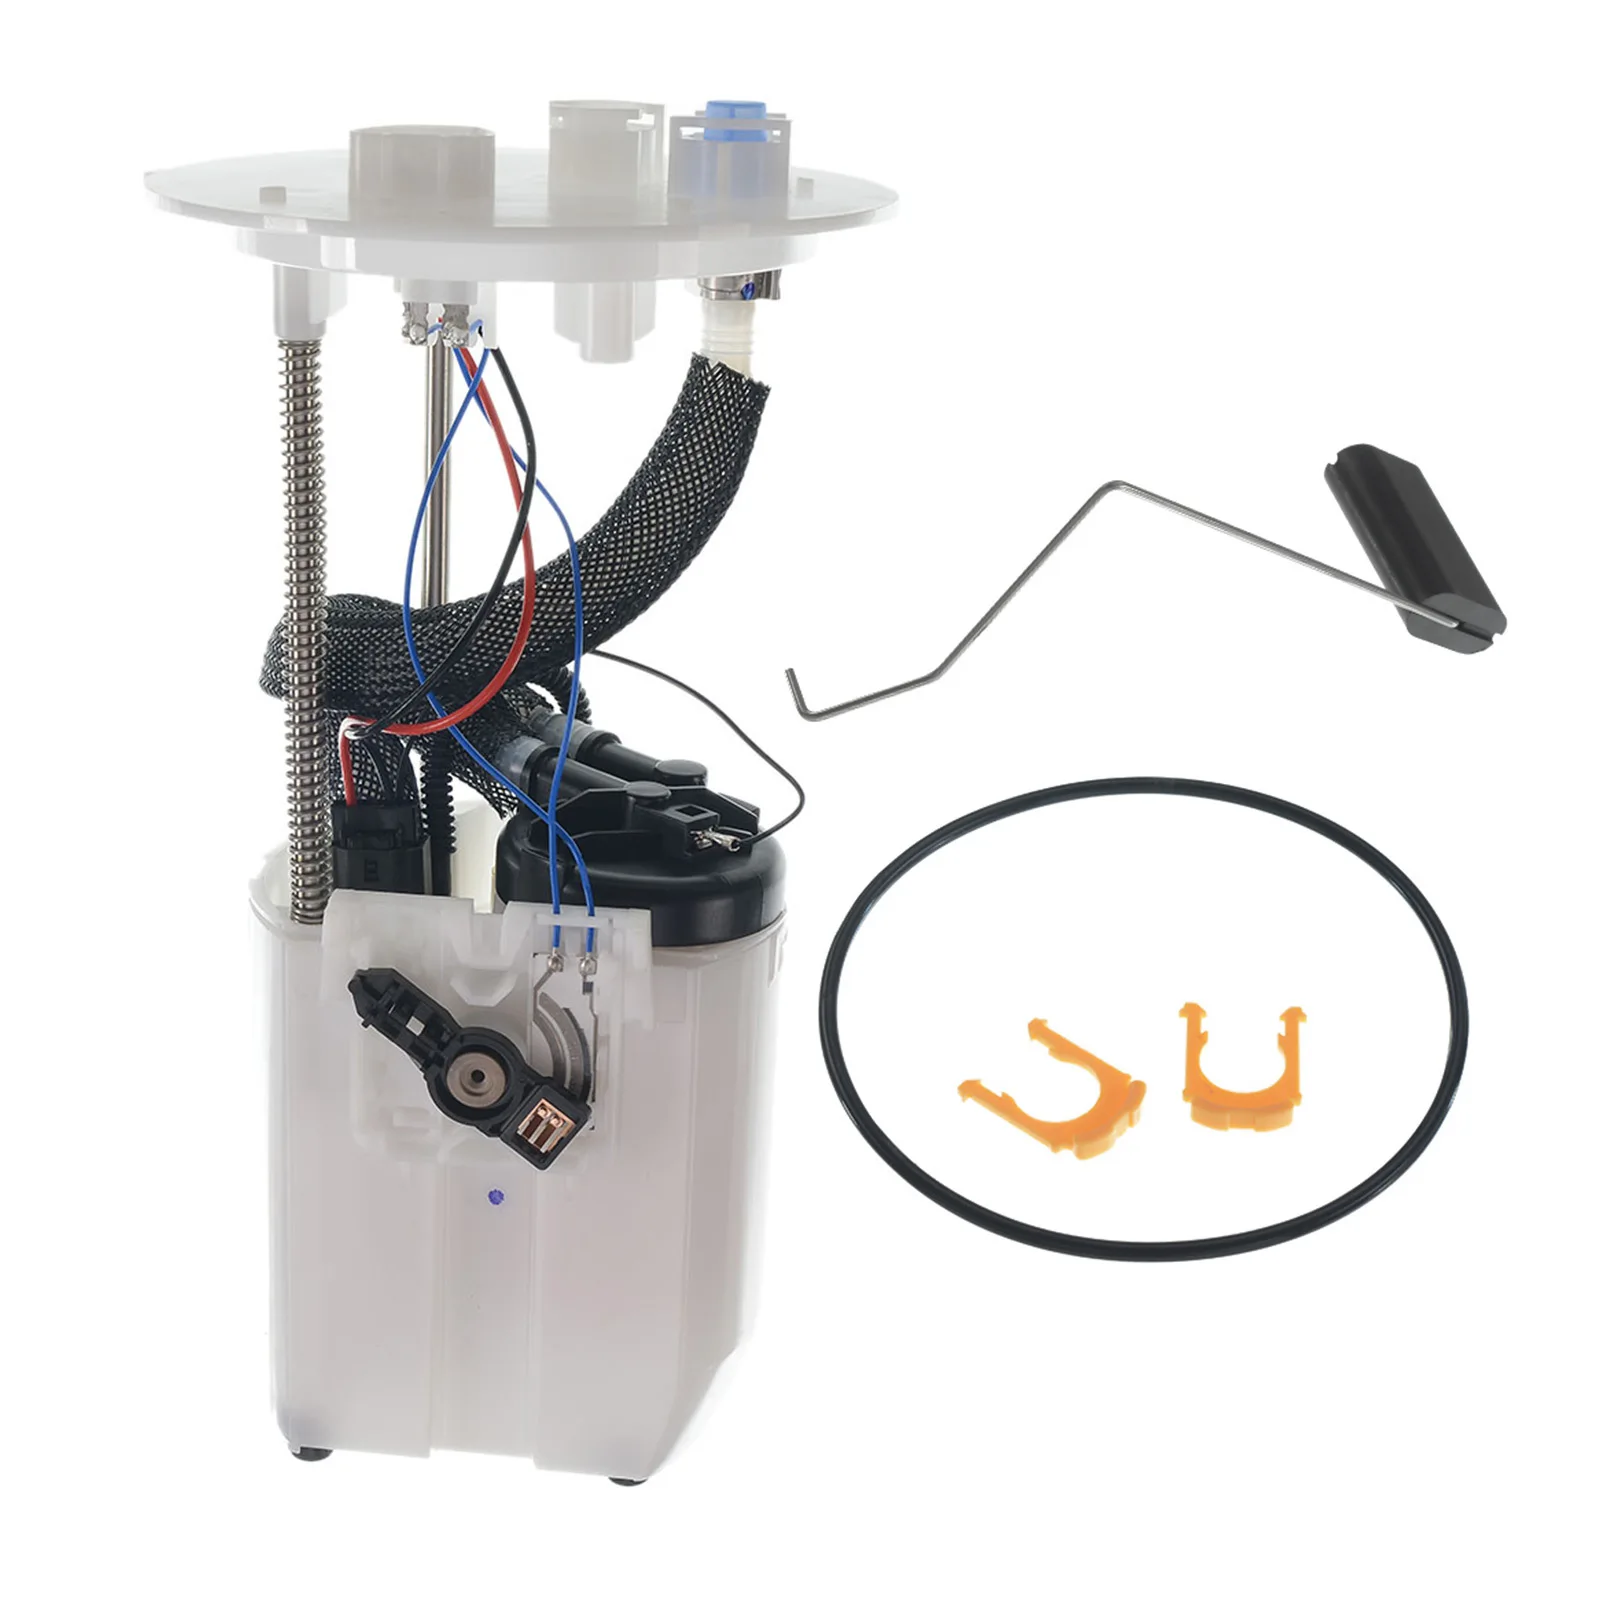 

In-stock CN US Electrical Fuel Pump Assembly for Lexus RX350 Toyota Highlander V6 3.5L E8883M E8883M